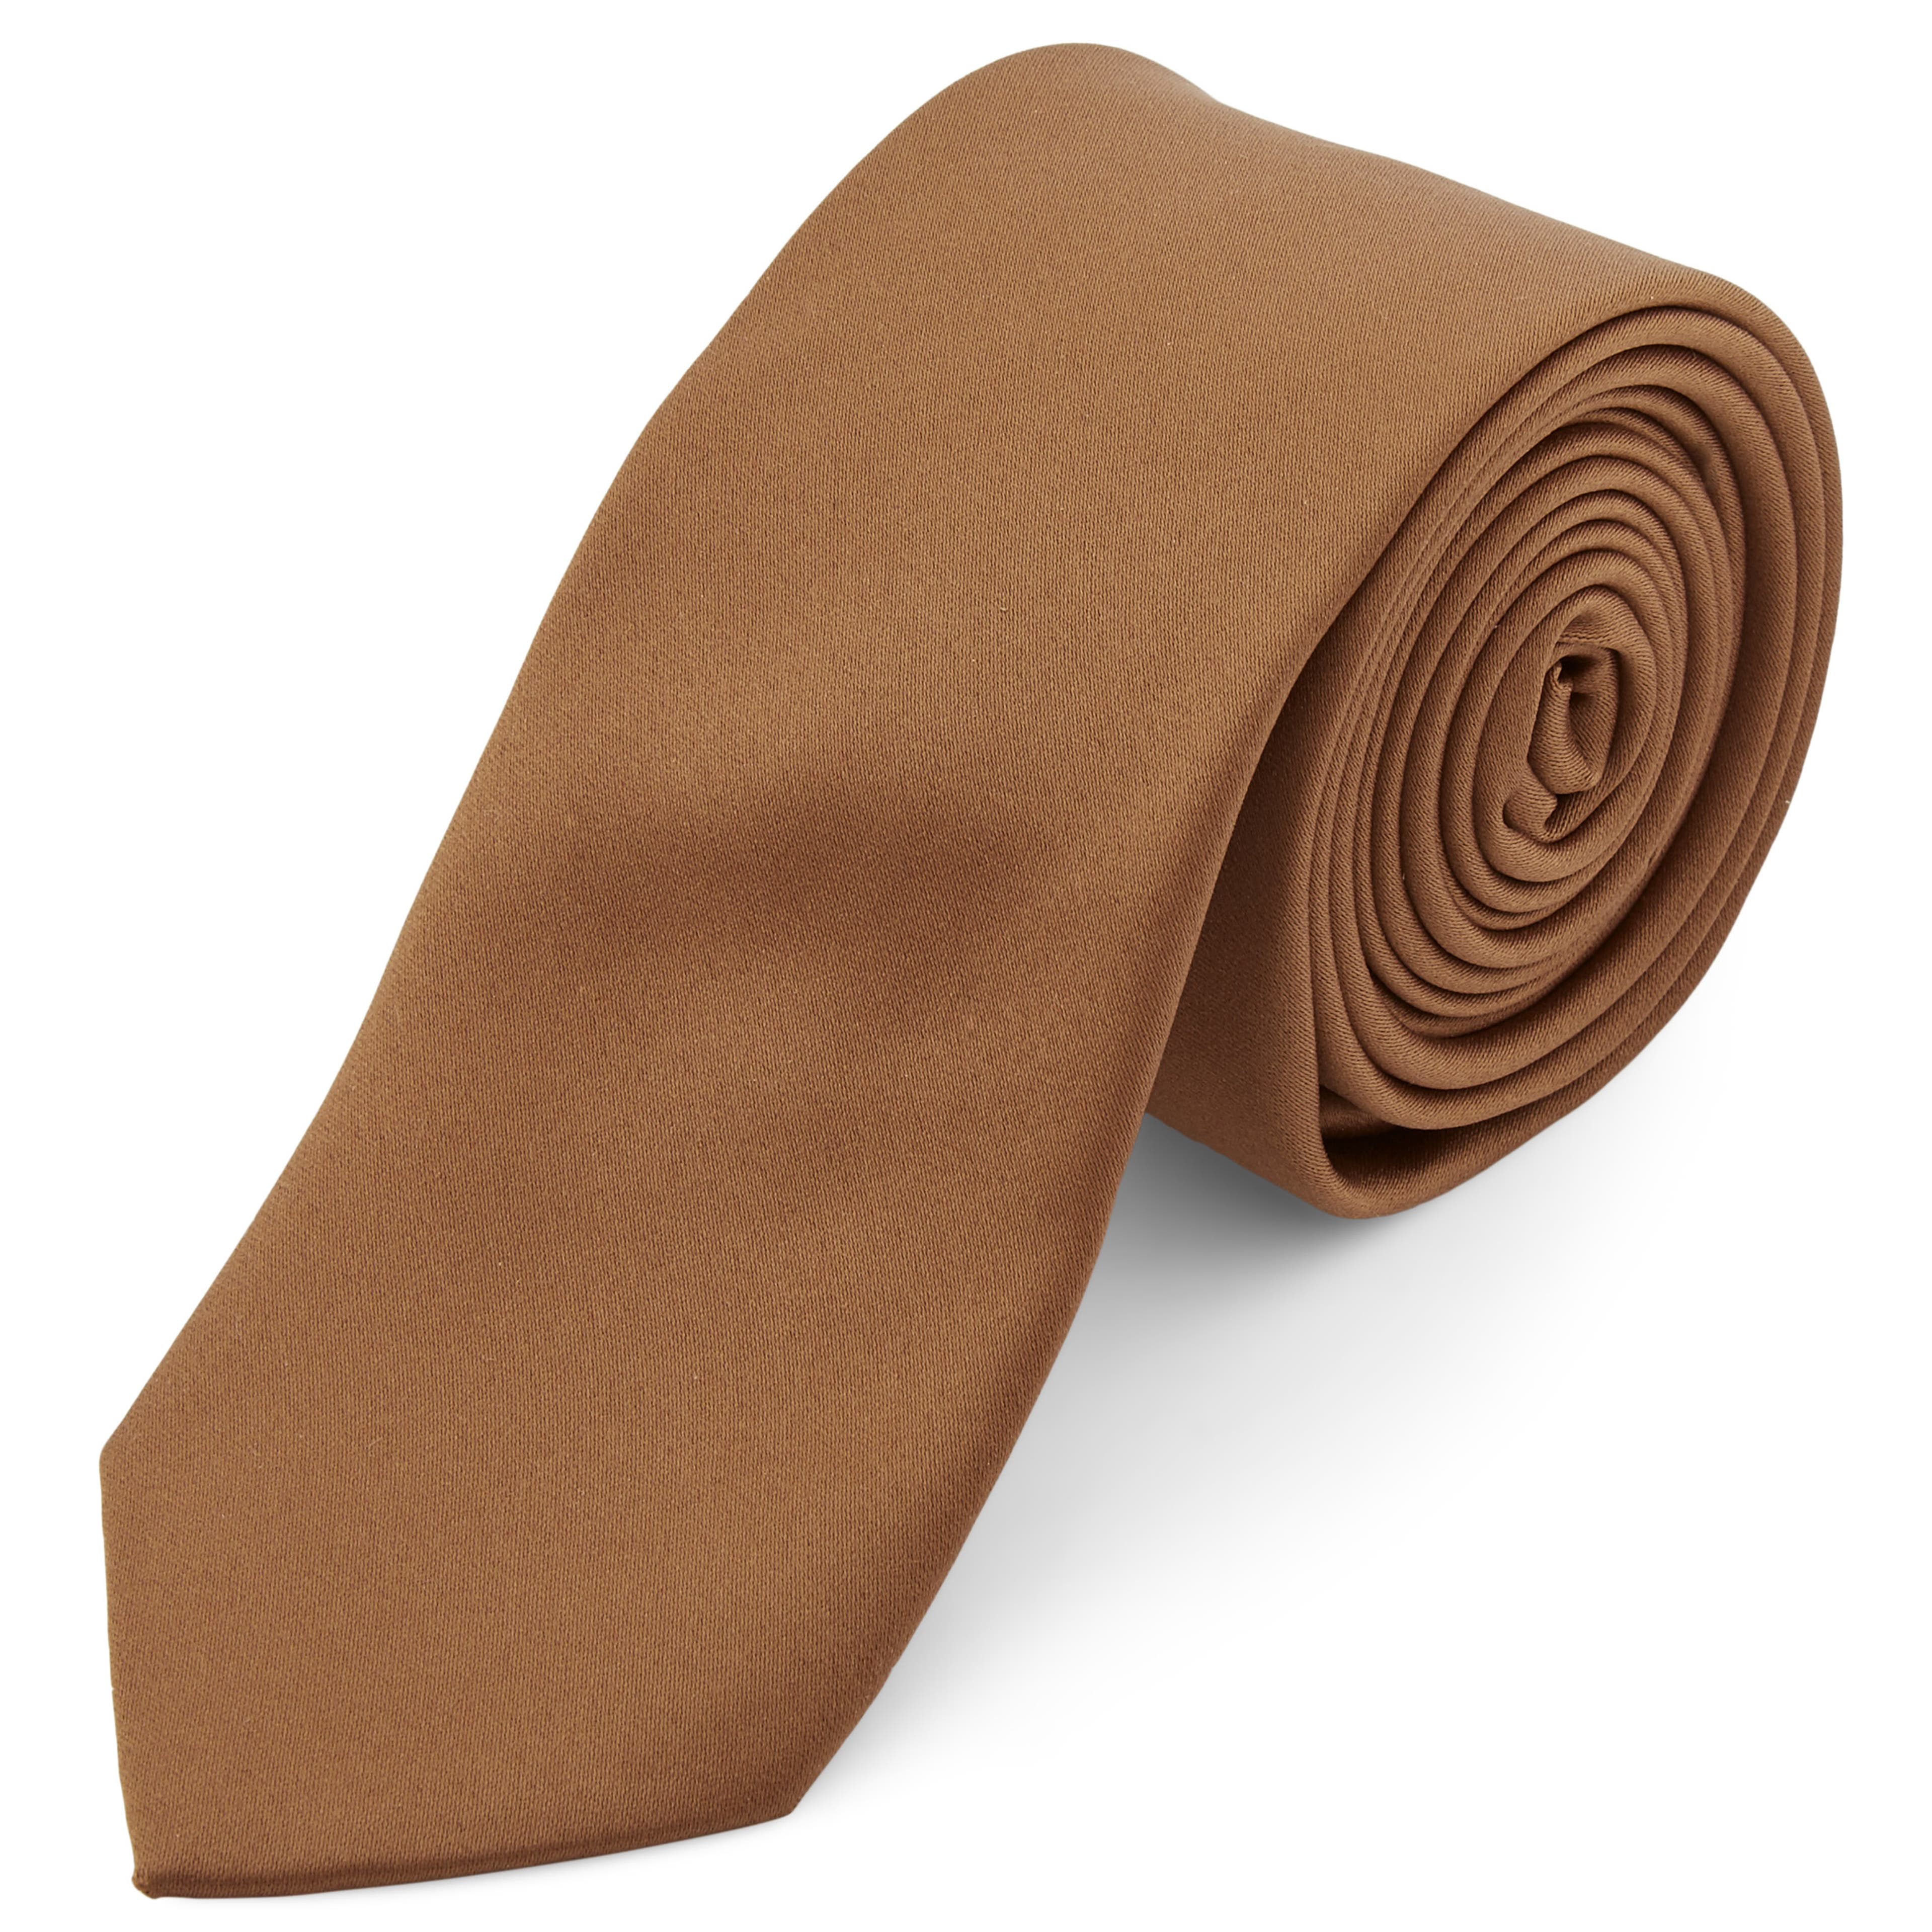 Basic Wide Shiny Baby Pink Polyester Tie, In stock!